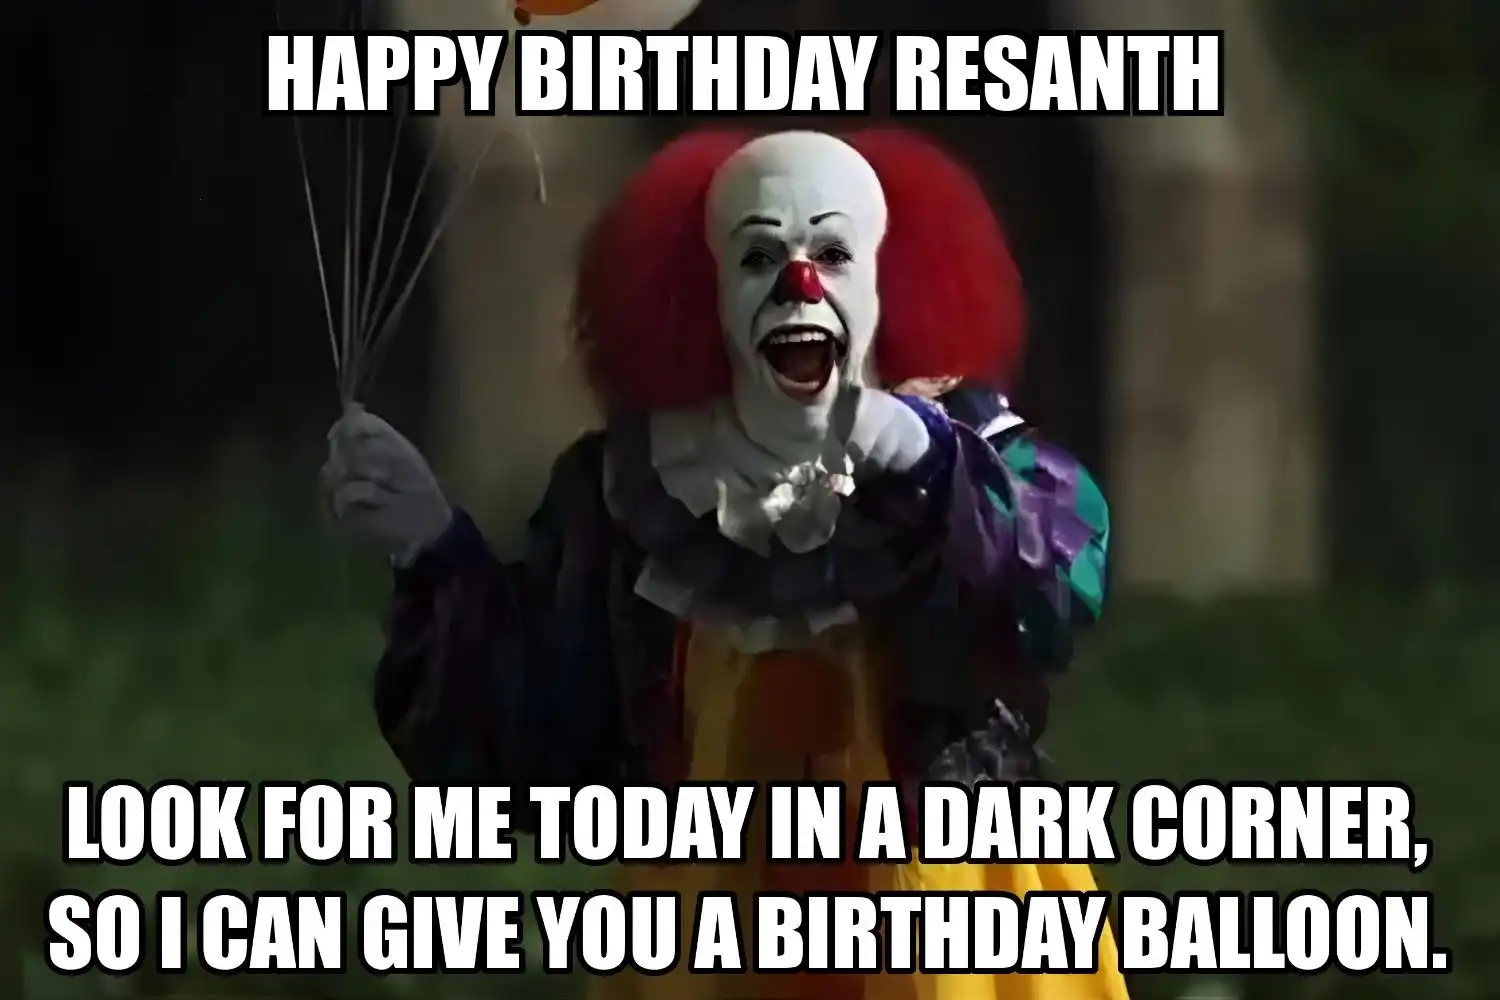 Happy Birthday Resanth I Can Give You A Balloon Meme